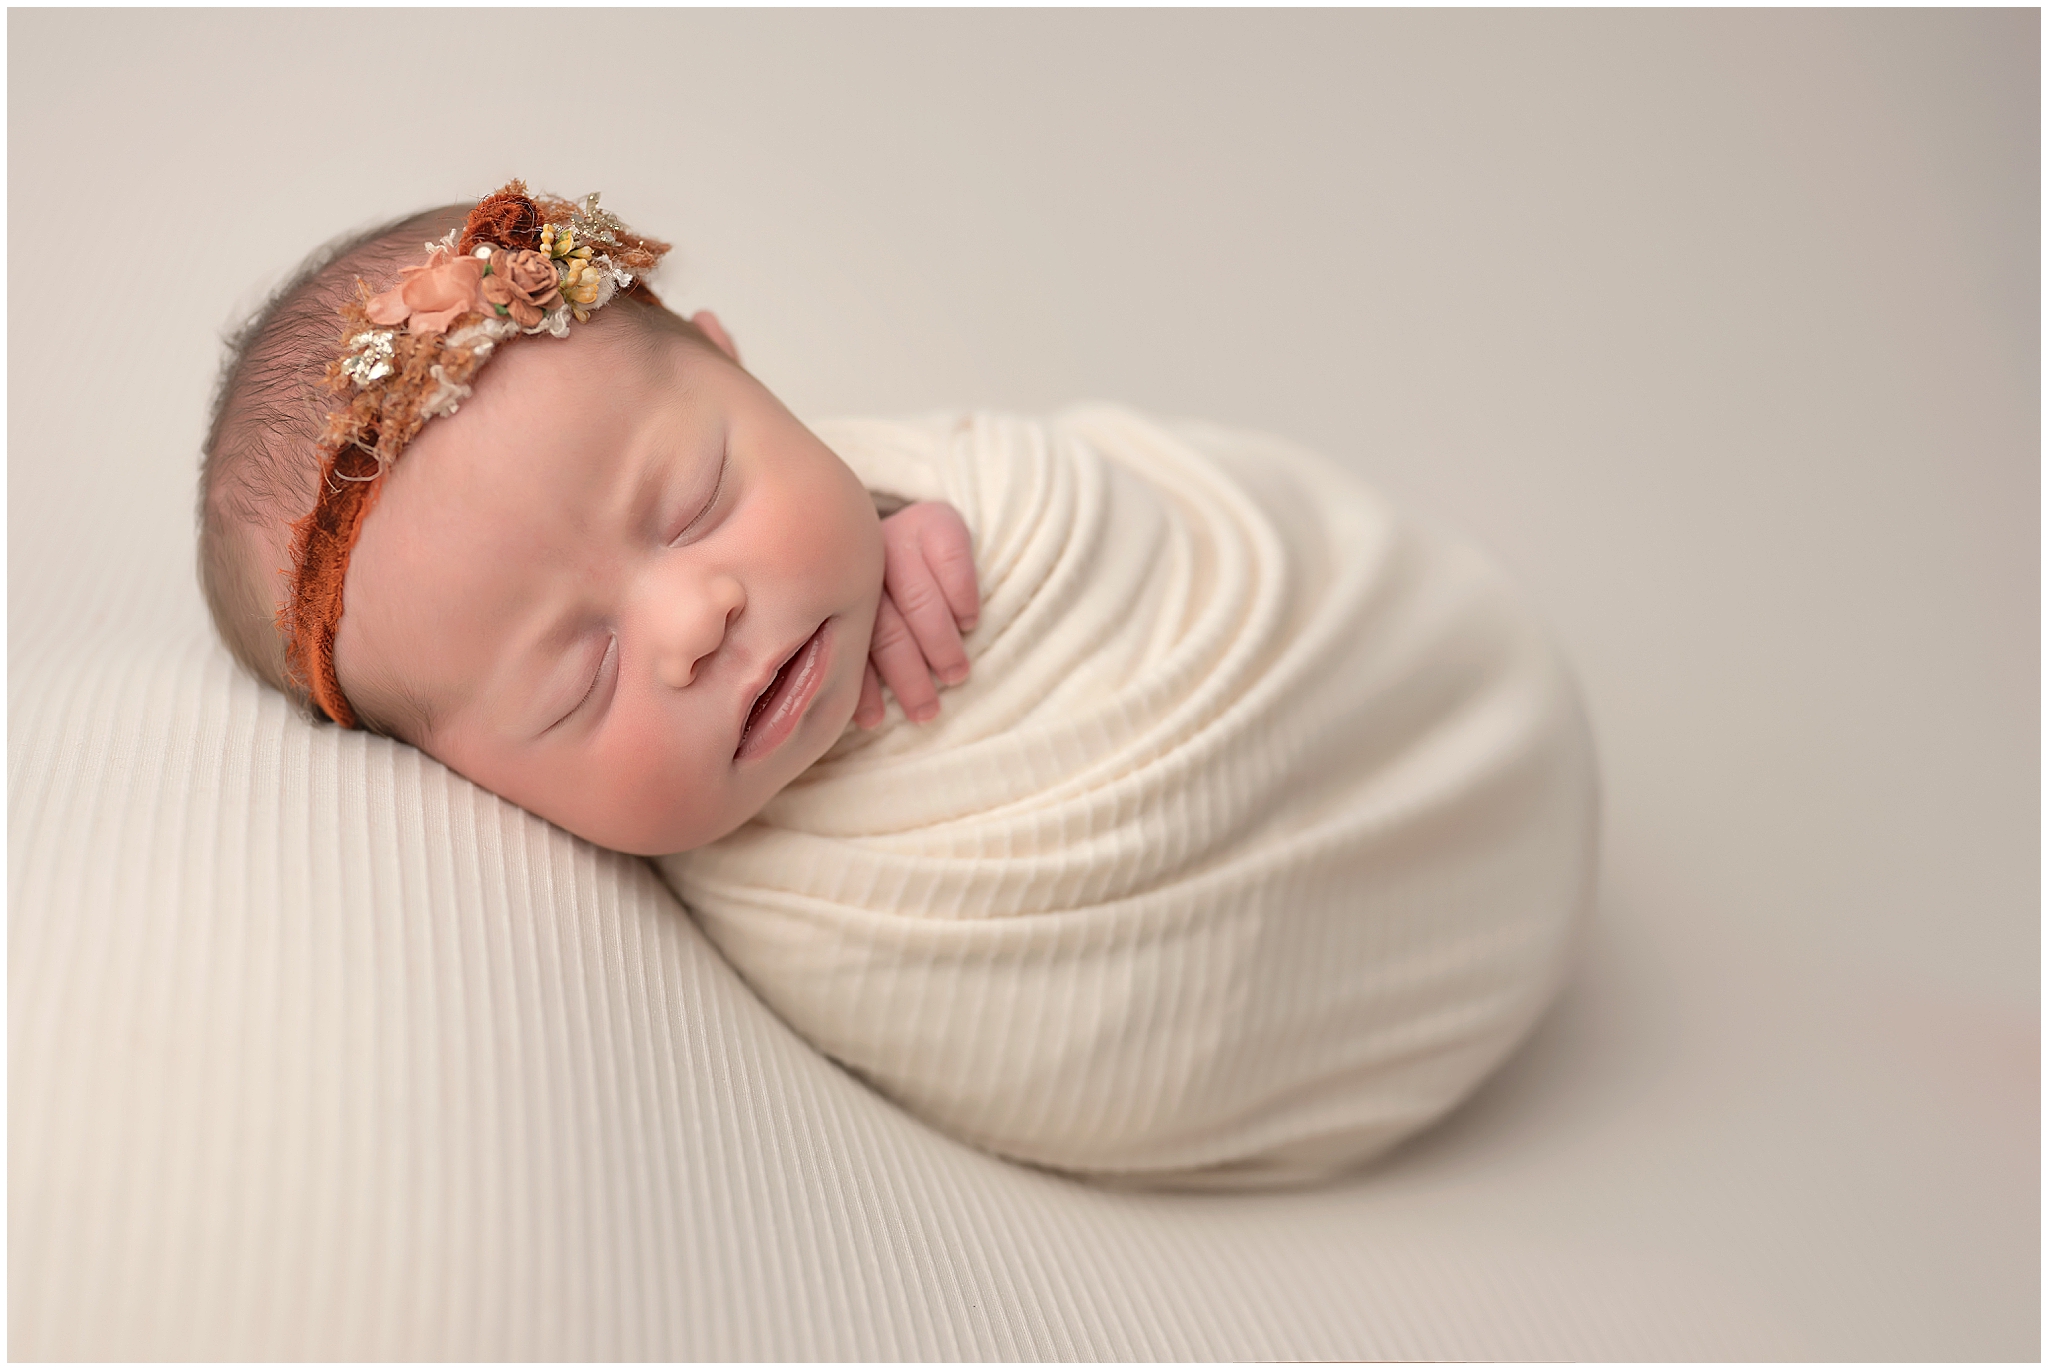 baby girl wrapped and sleeping during newborn session at photography studio in london ontario